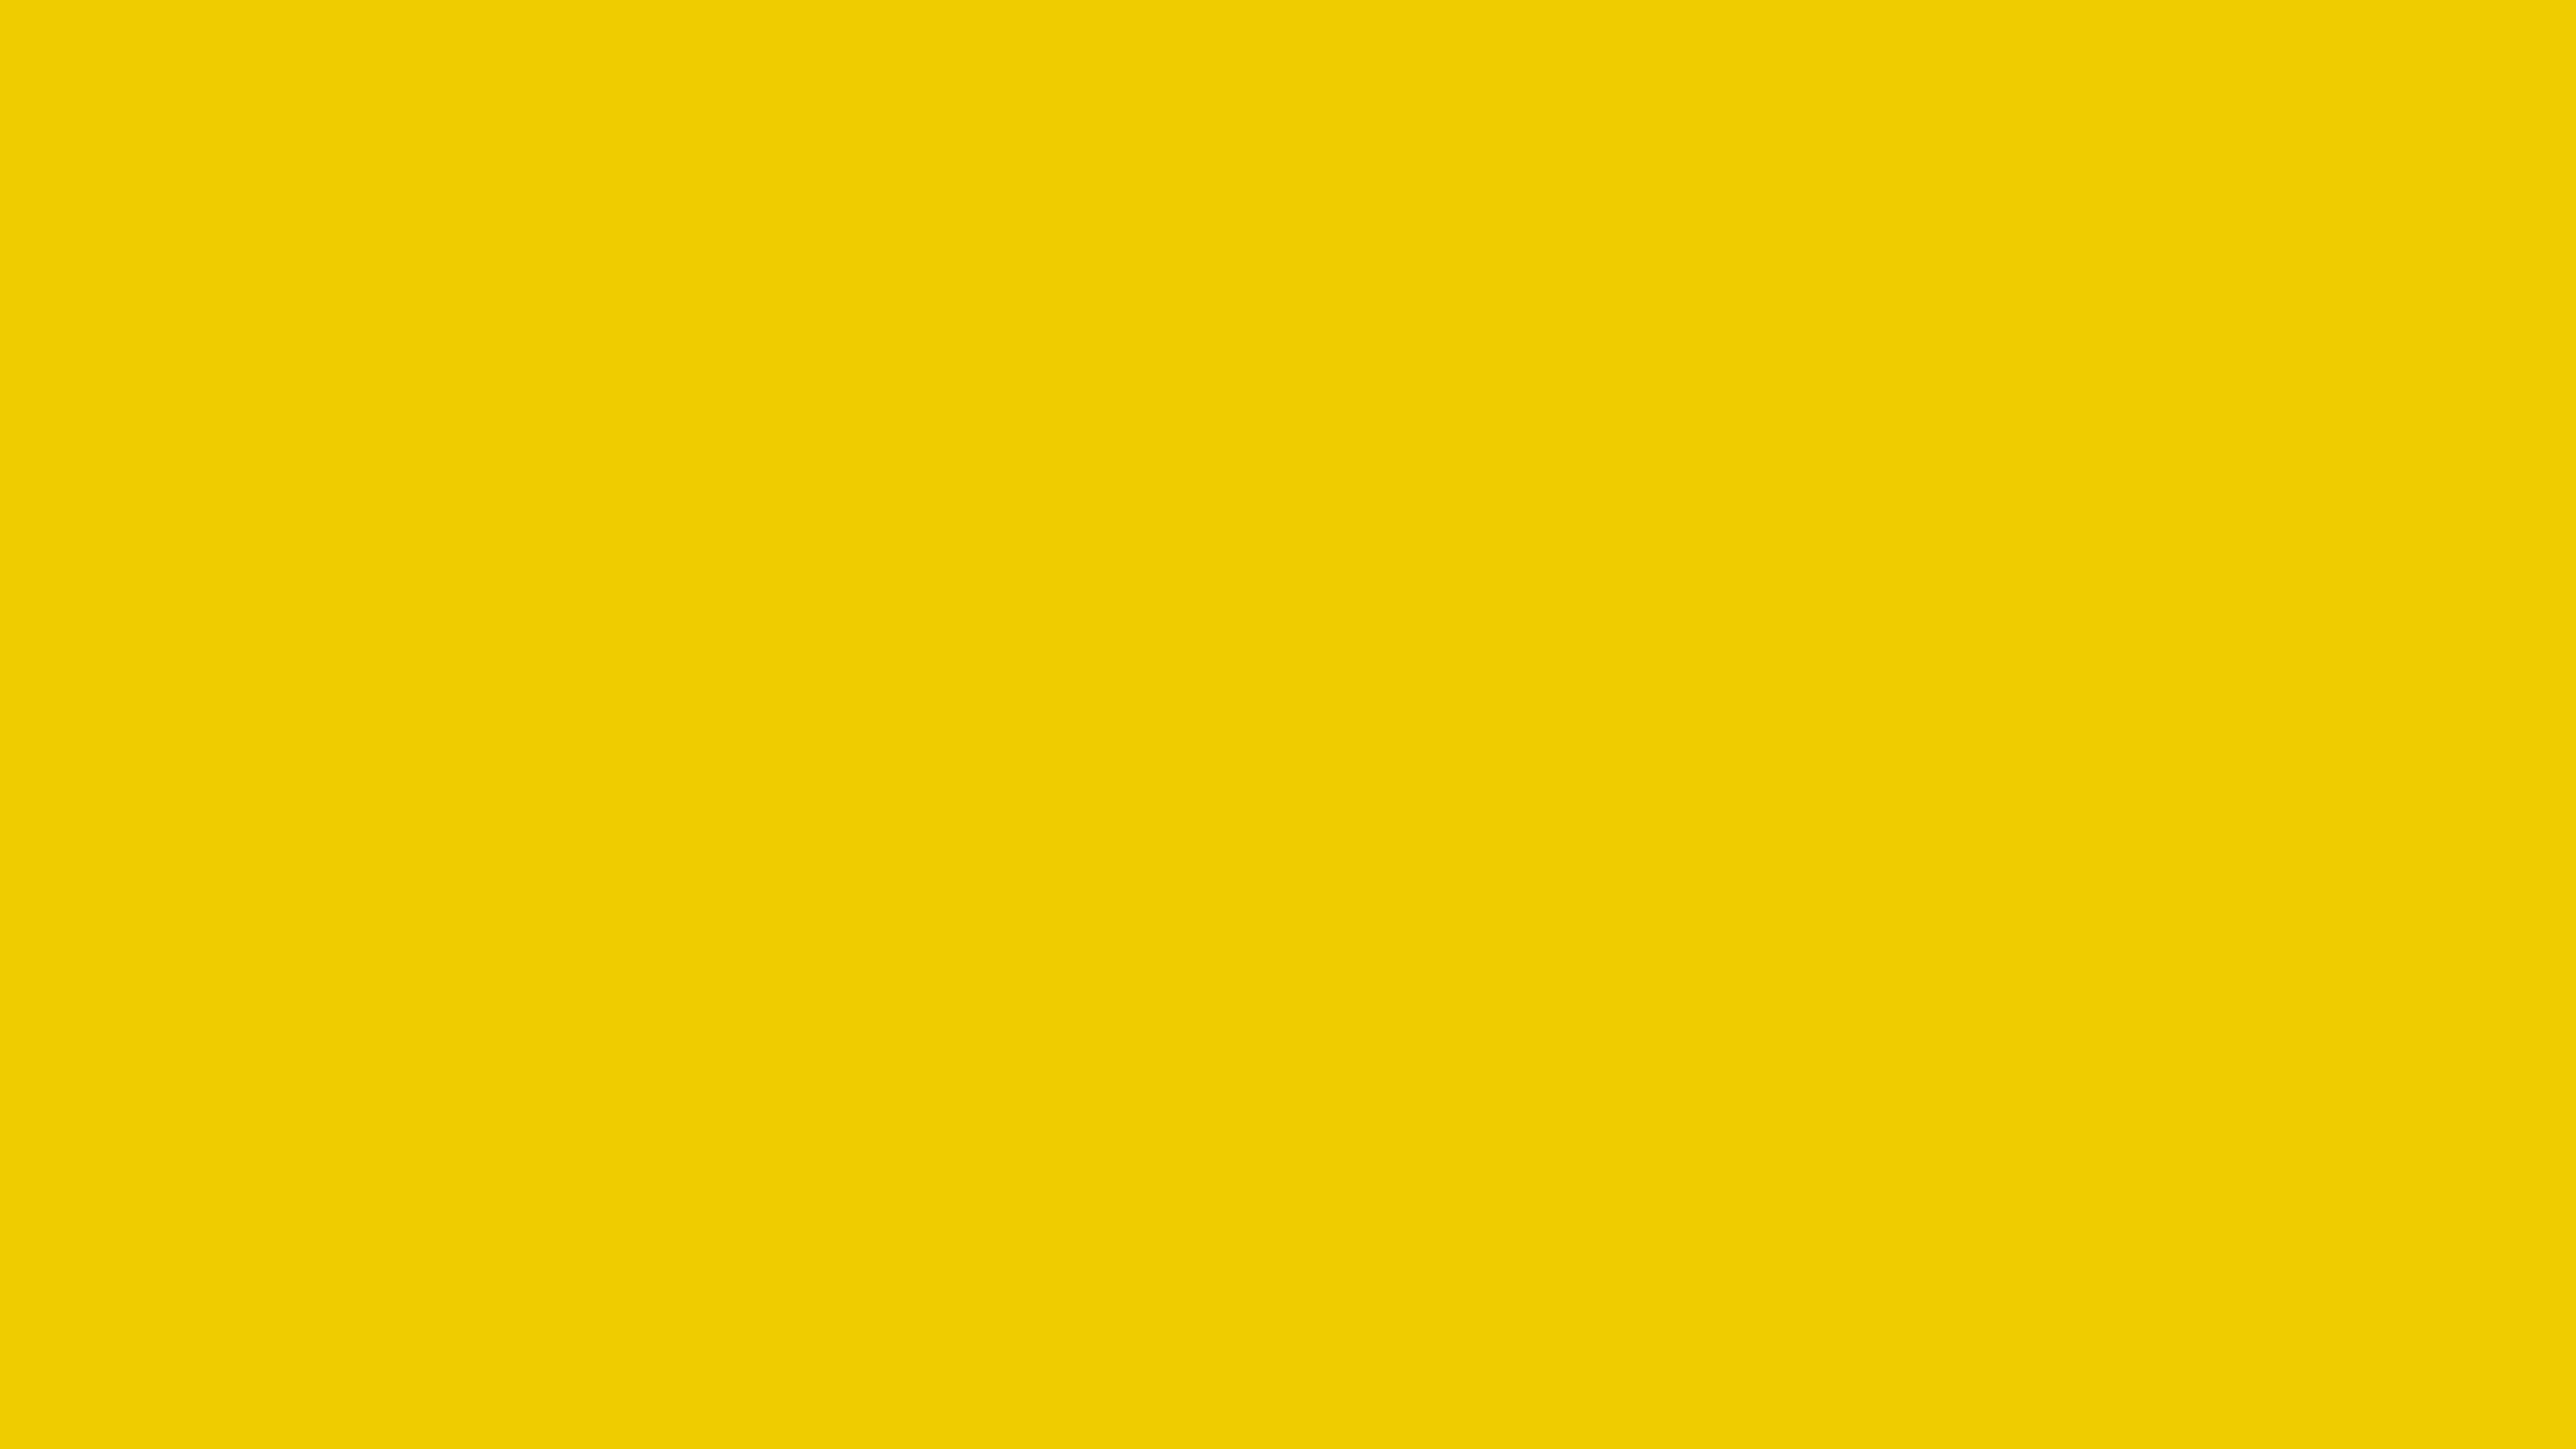 7680x4320 Yellow Munsell Solid Color Background